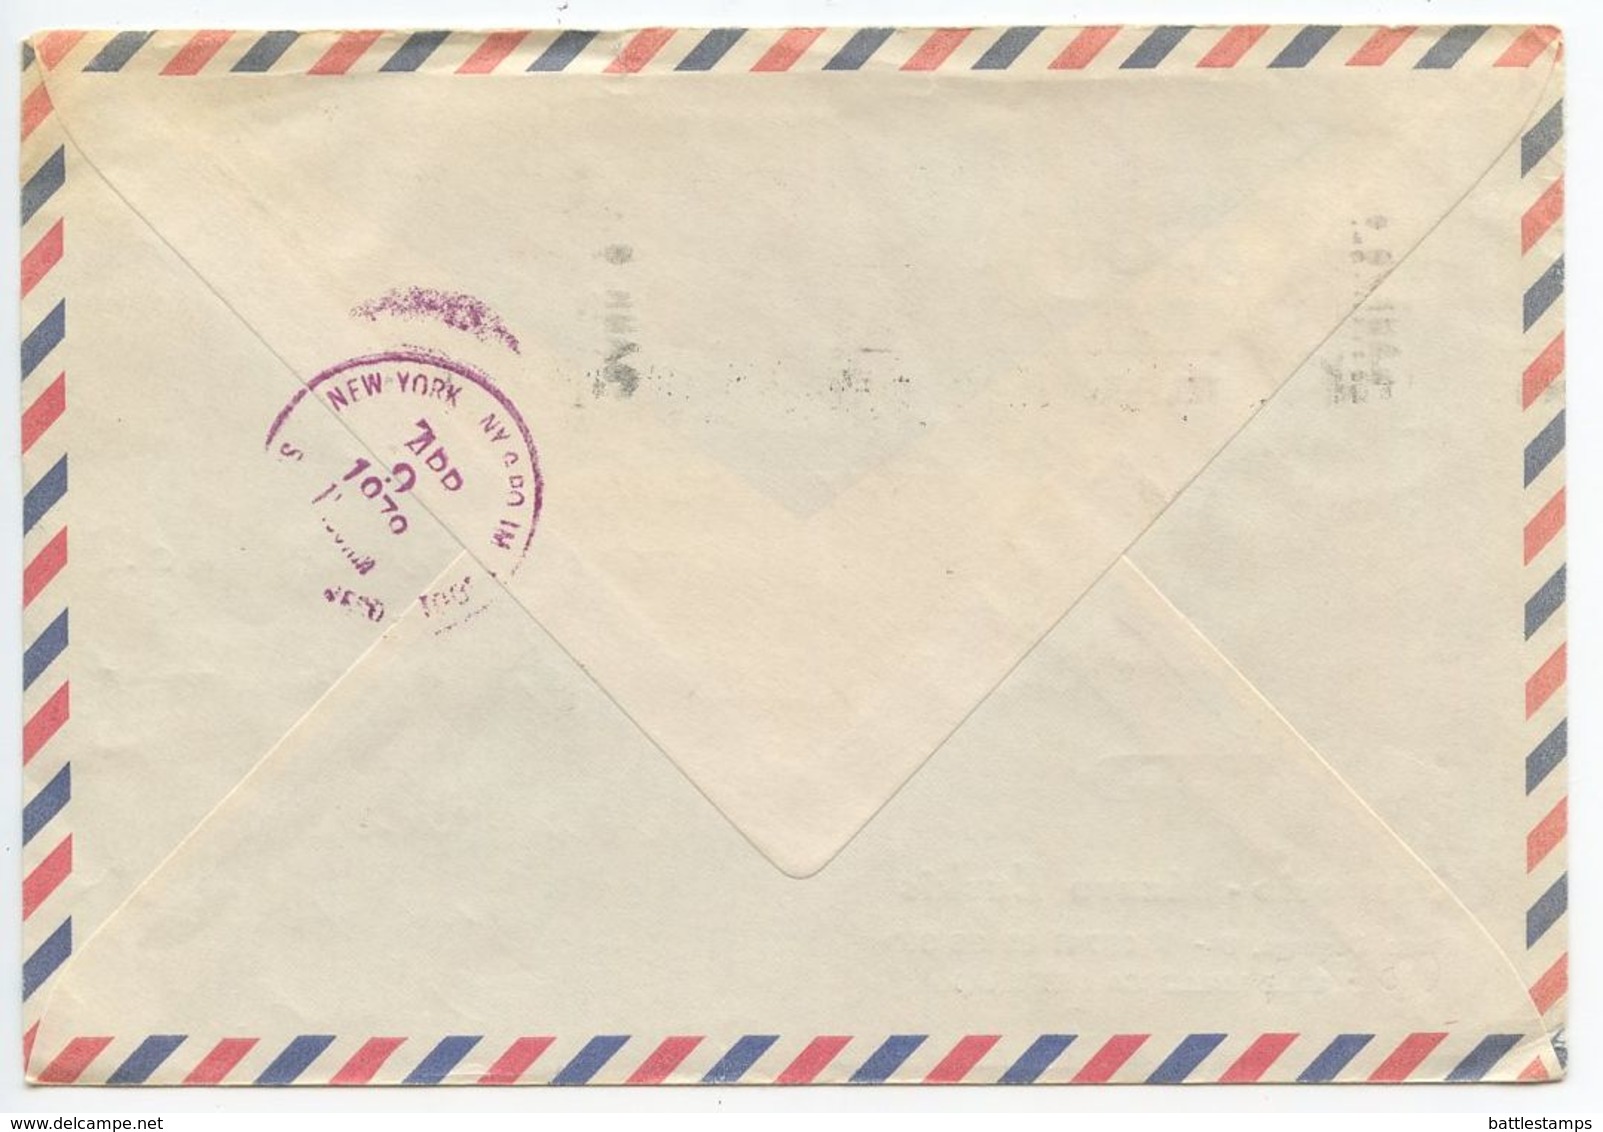 Spain 1978 Airmail Special Delivery Cover Valencia To New York, NY - Covers & Documents